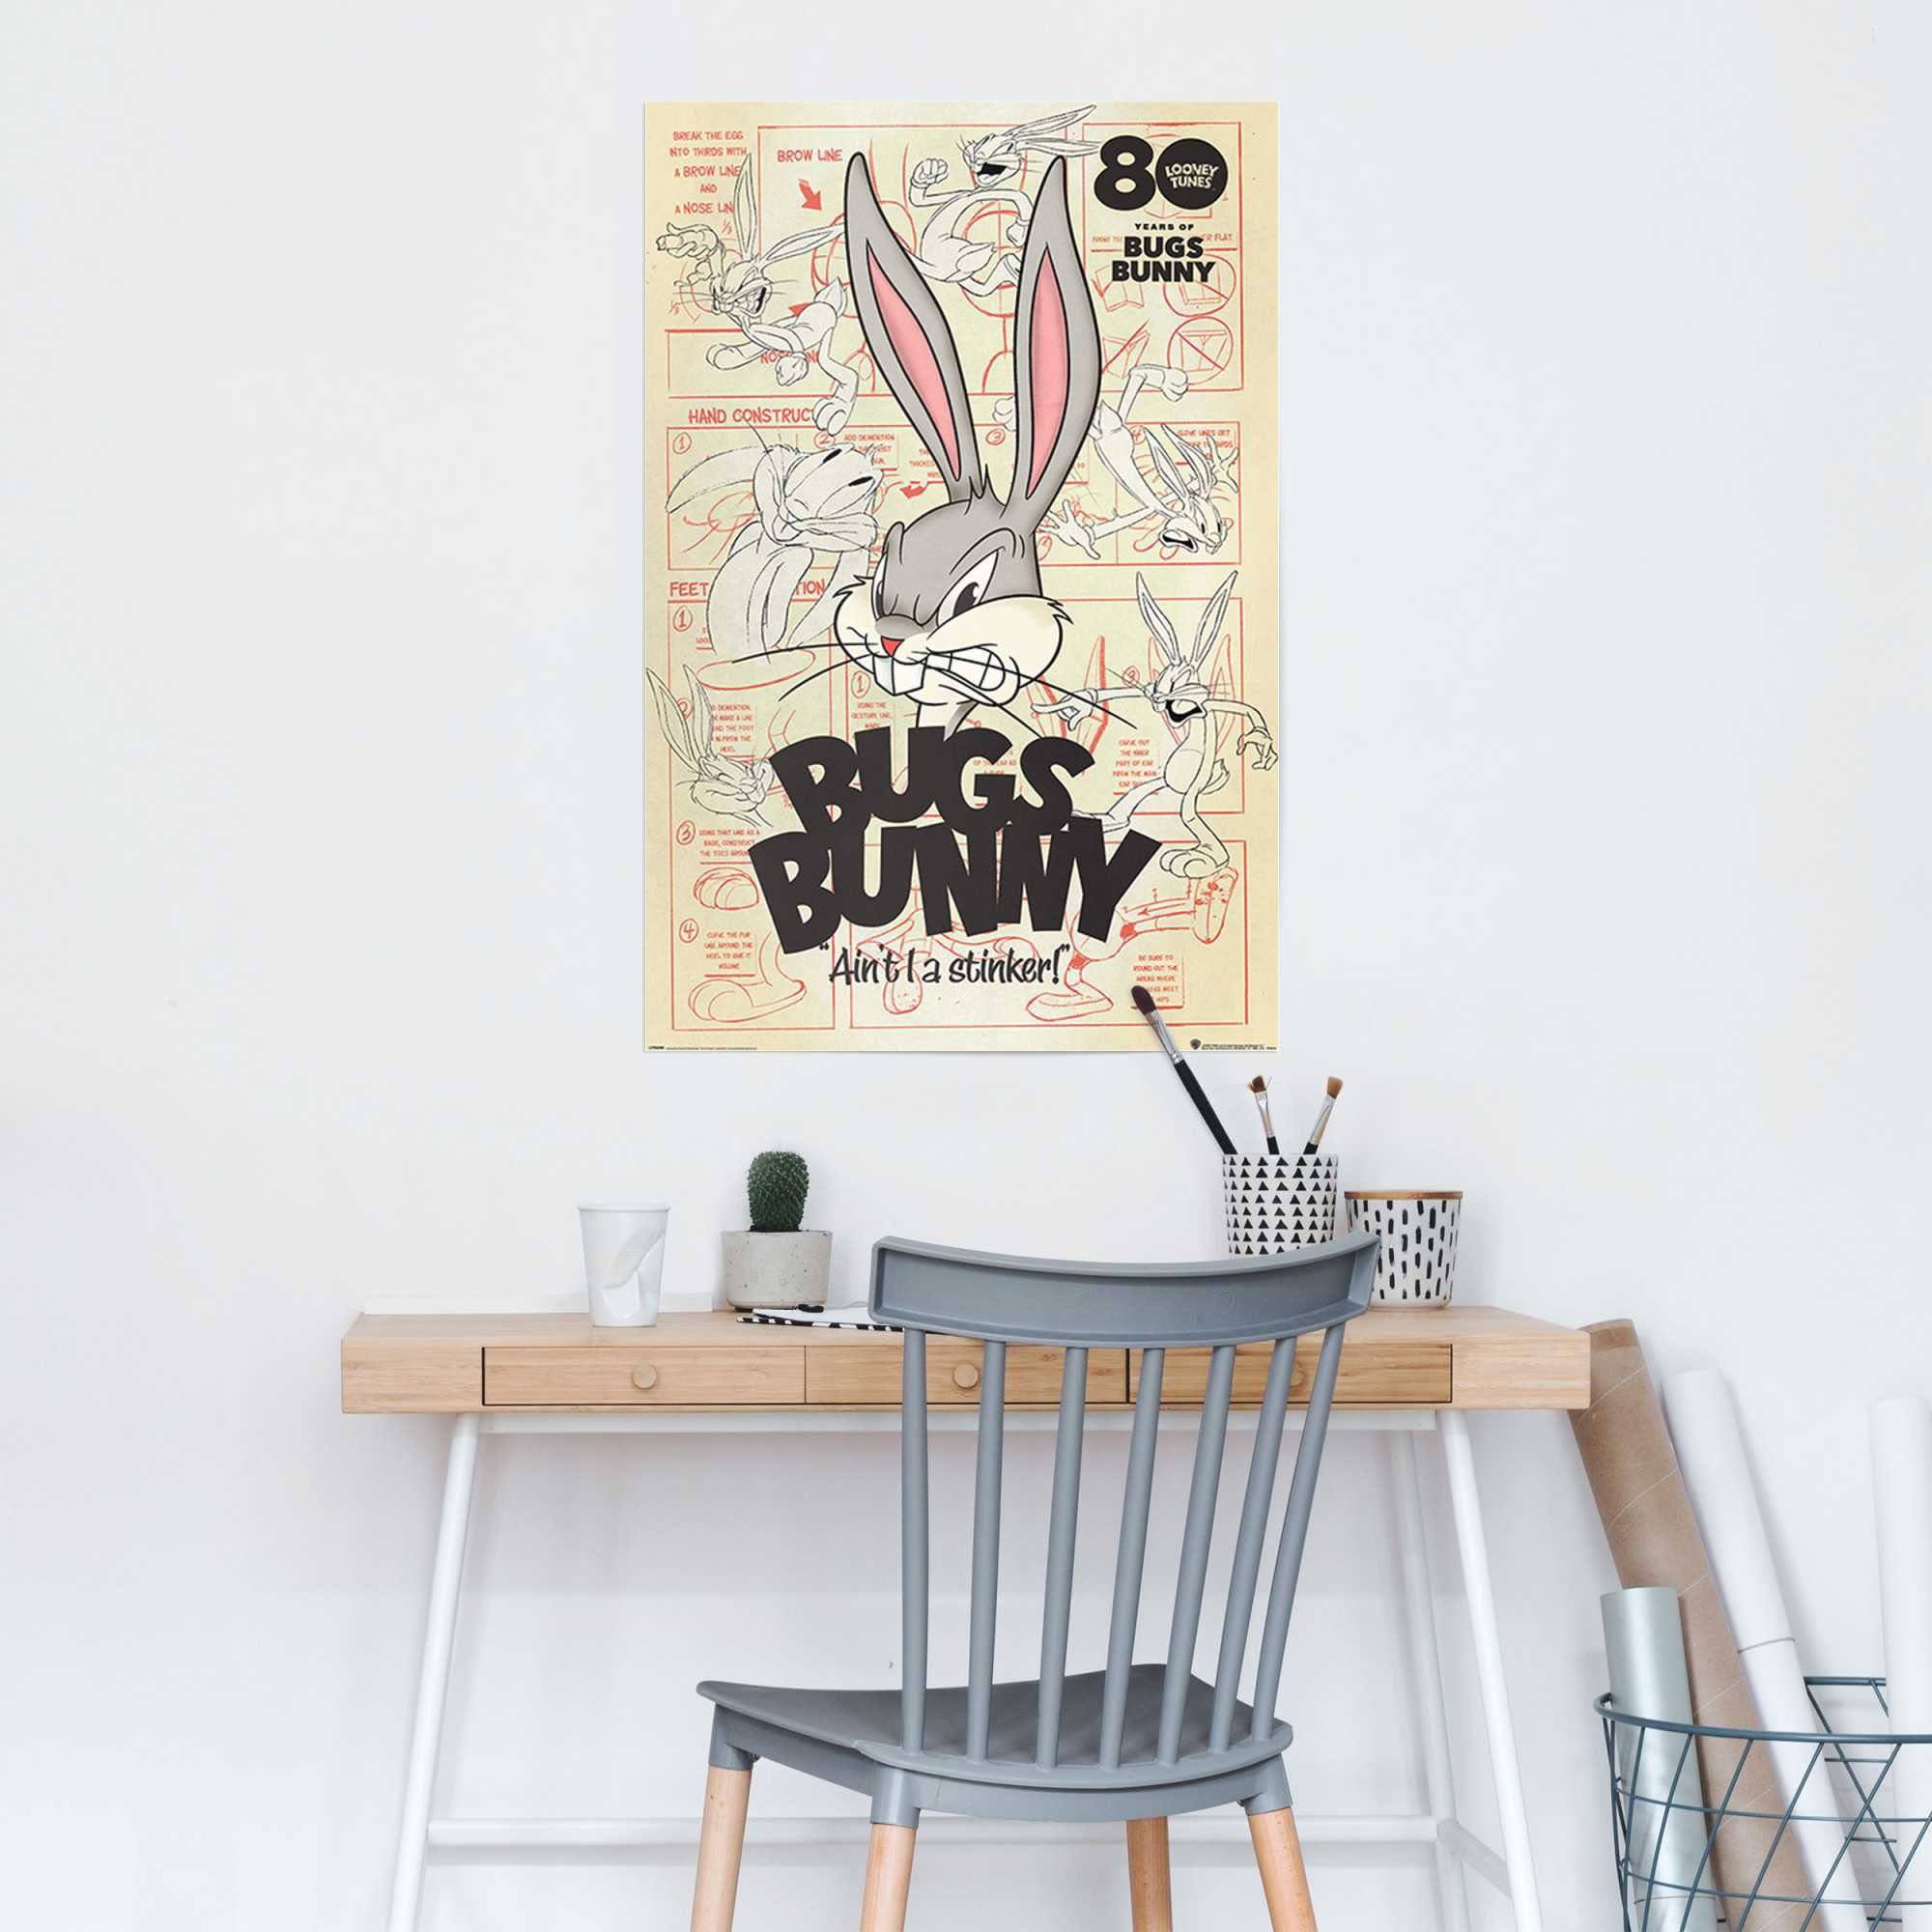 Warner Bugs Looney - - ait Poster Bunny Tunes Hase, (1 St) I Bros a stinker Reinders!